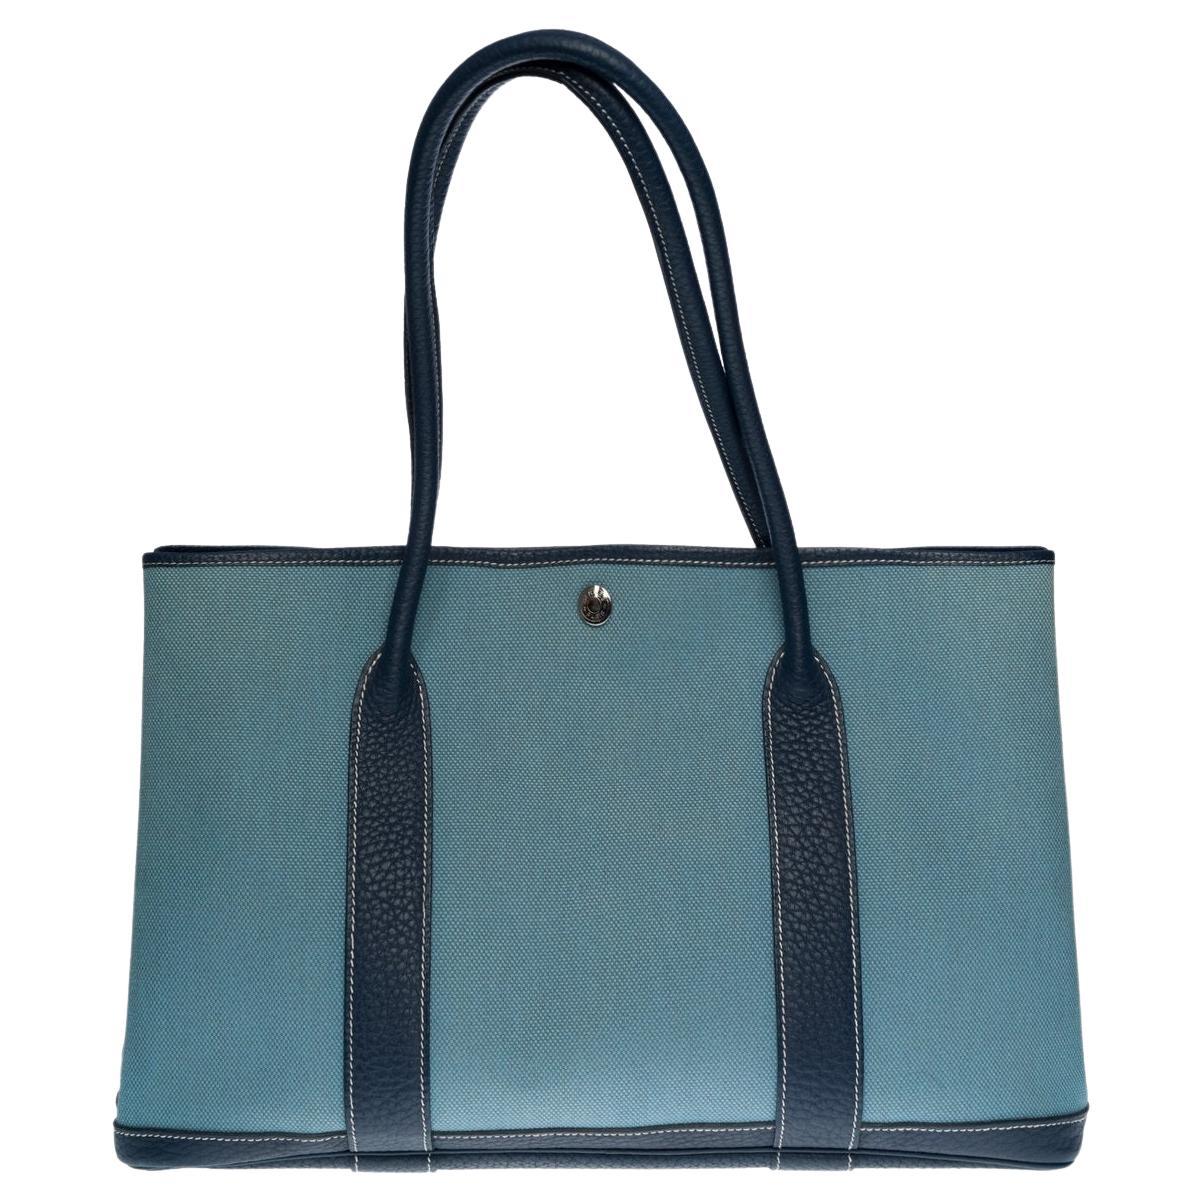 Gorgeous Hermès Garden Party 36 Tote bag in Blue Denim Canvas & Leather, SHW For Sale